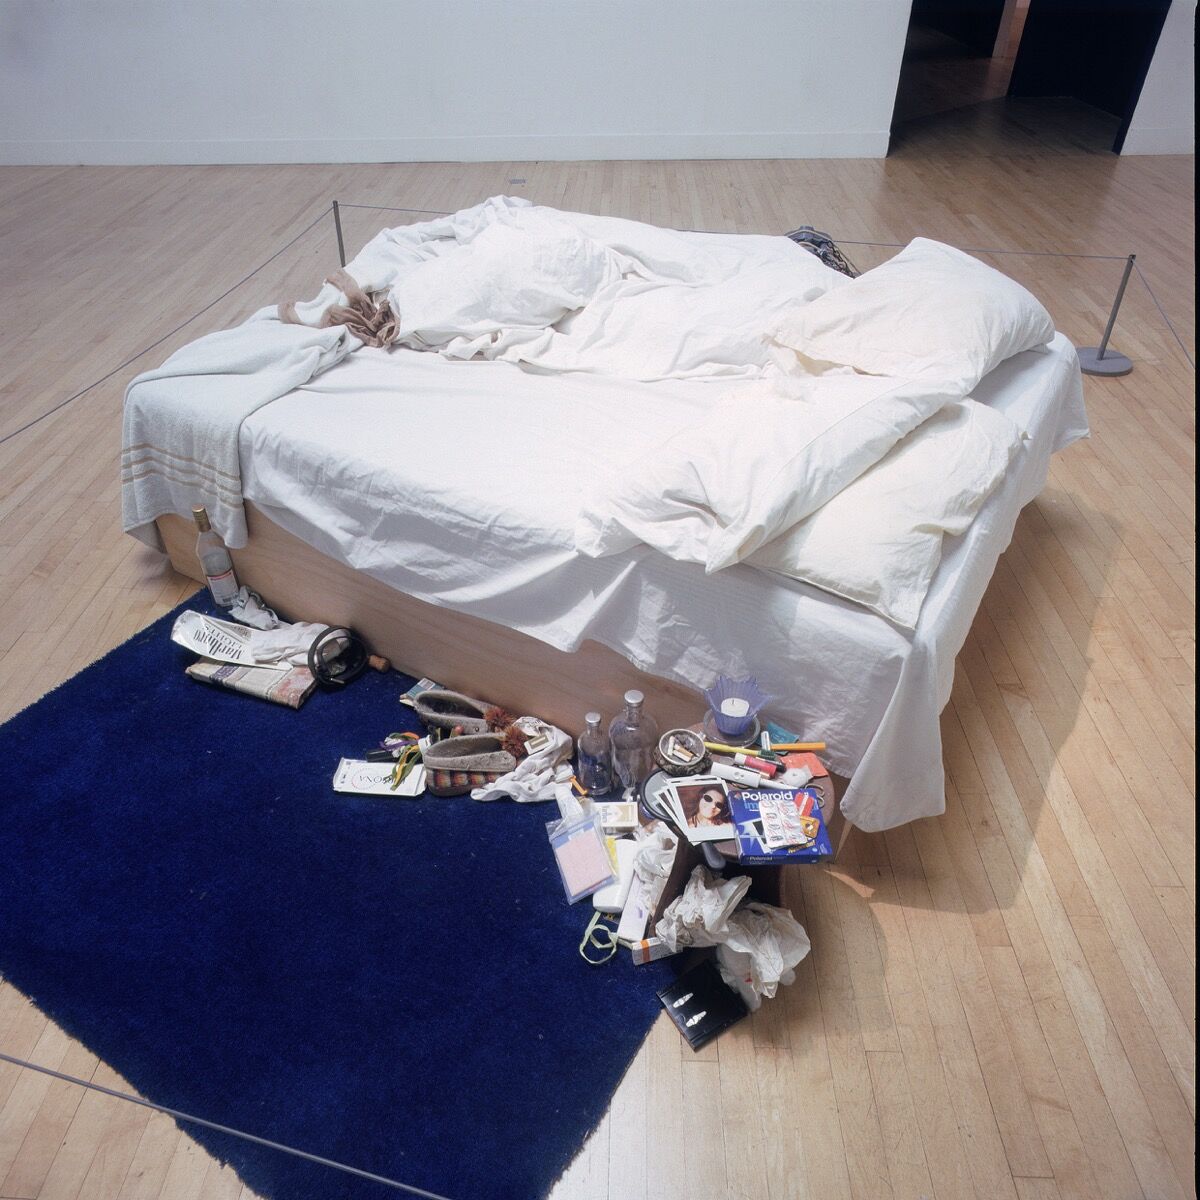 Installation view of Tracey Emin, My Bed, at the Turner Prize Exhibition, Tate Gallery, London, 1999-2000. Photo © Stephen White. © 2018 Tracey Emin. All rights reservied, DACS, London / Artists Rights Society (ARS), New York. Courtesy of White Cube.